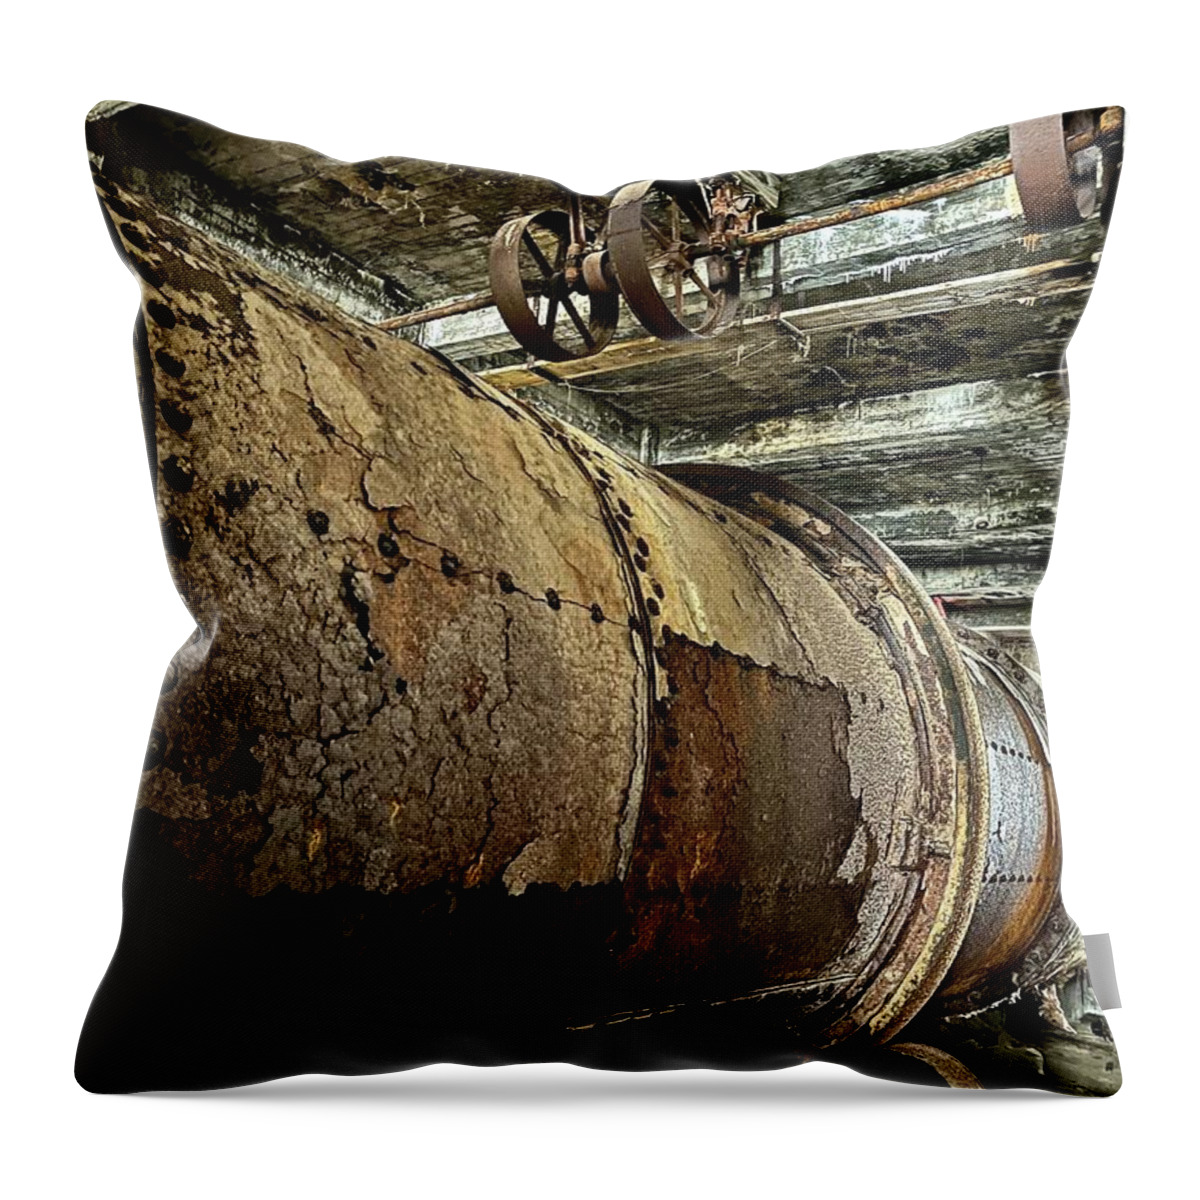 Old Throw Pillow featuring the photograph Ancient Machinery by Sarah Lilja